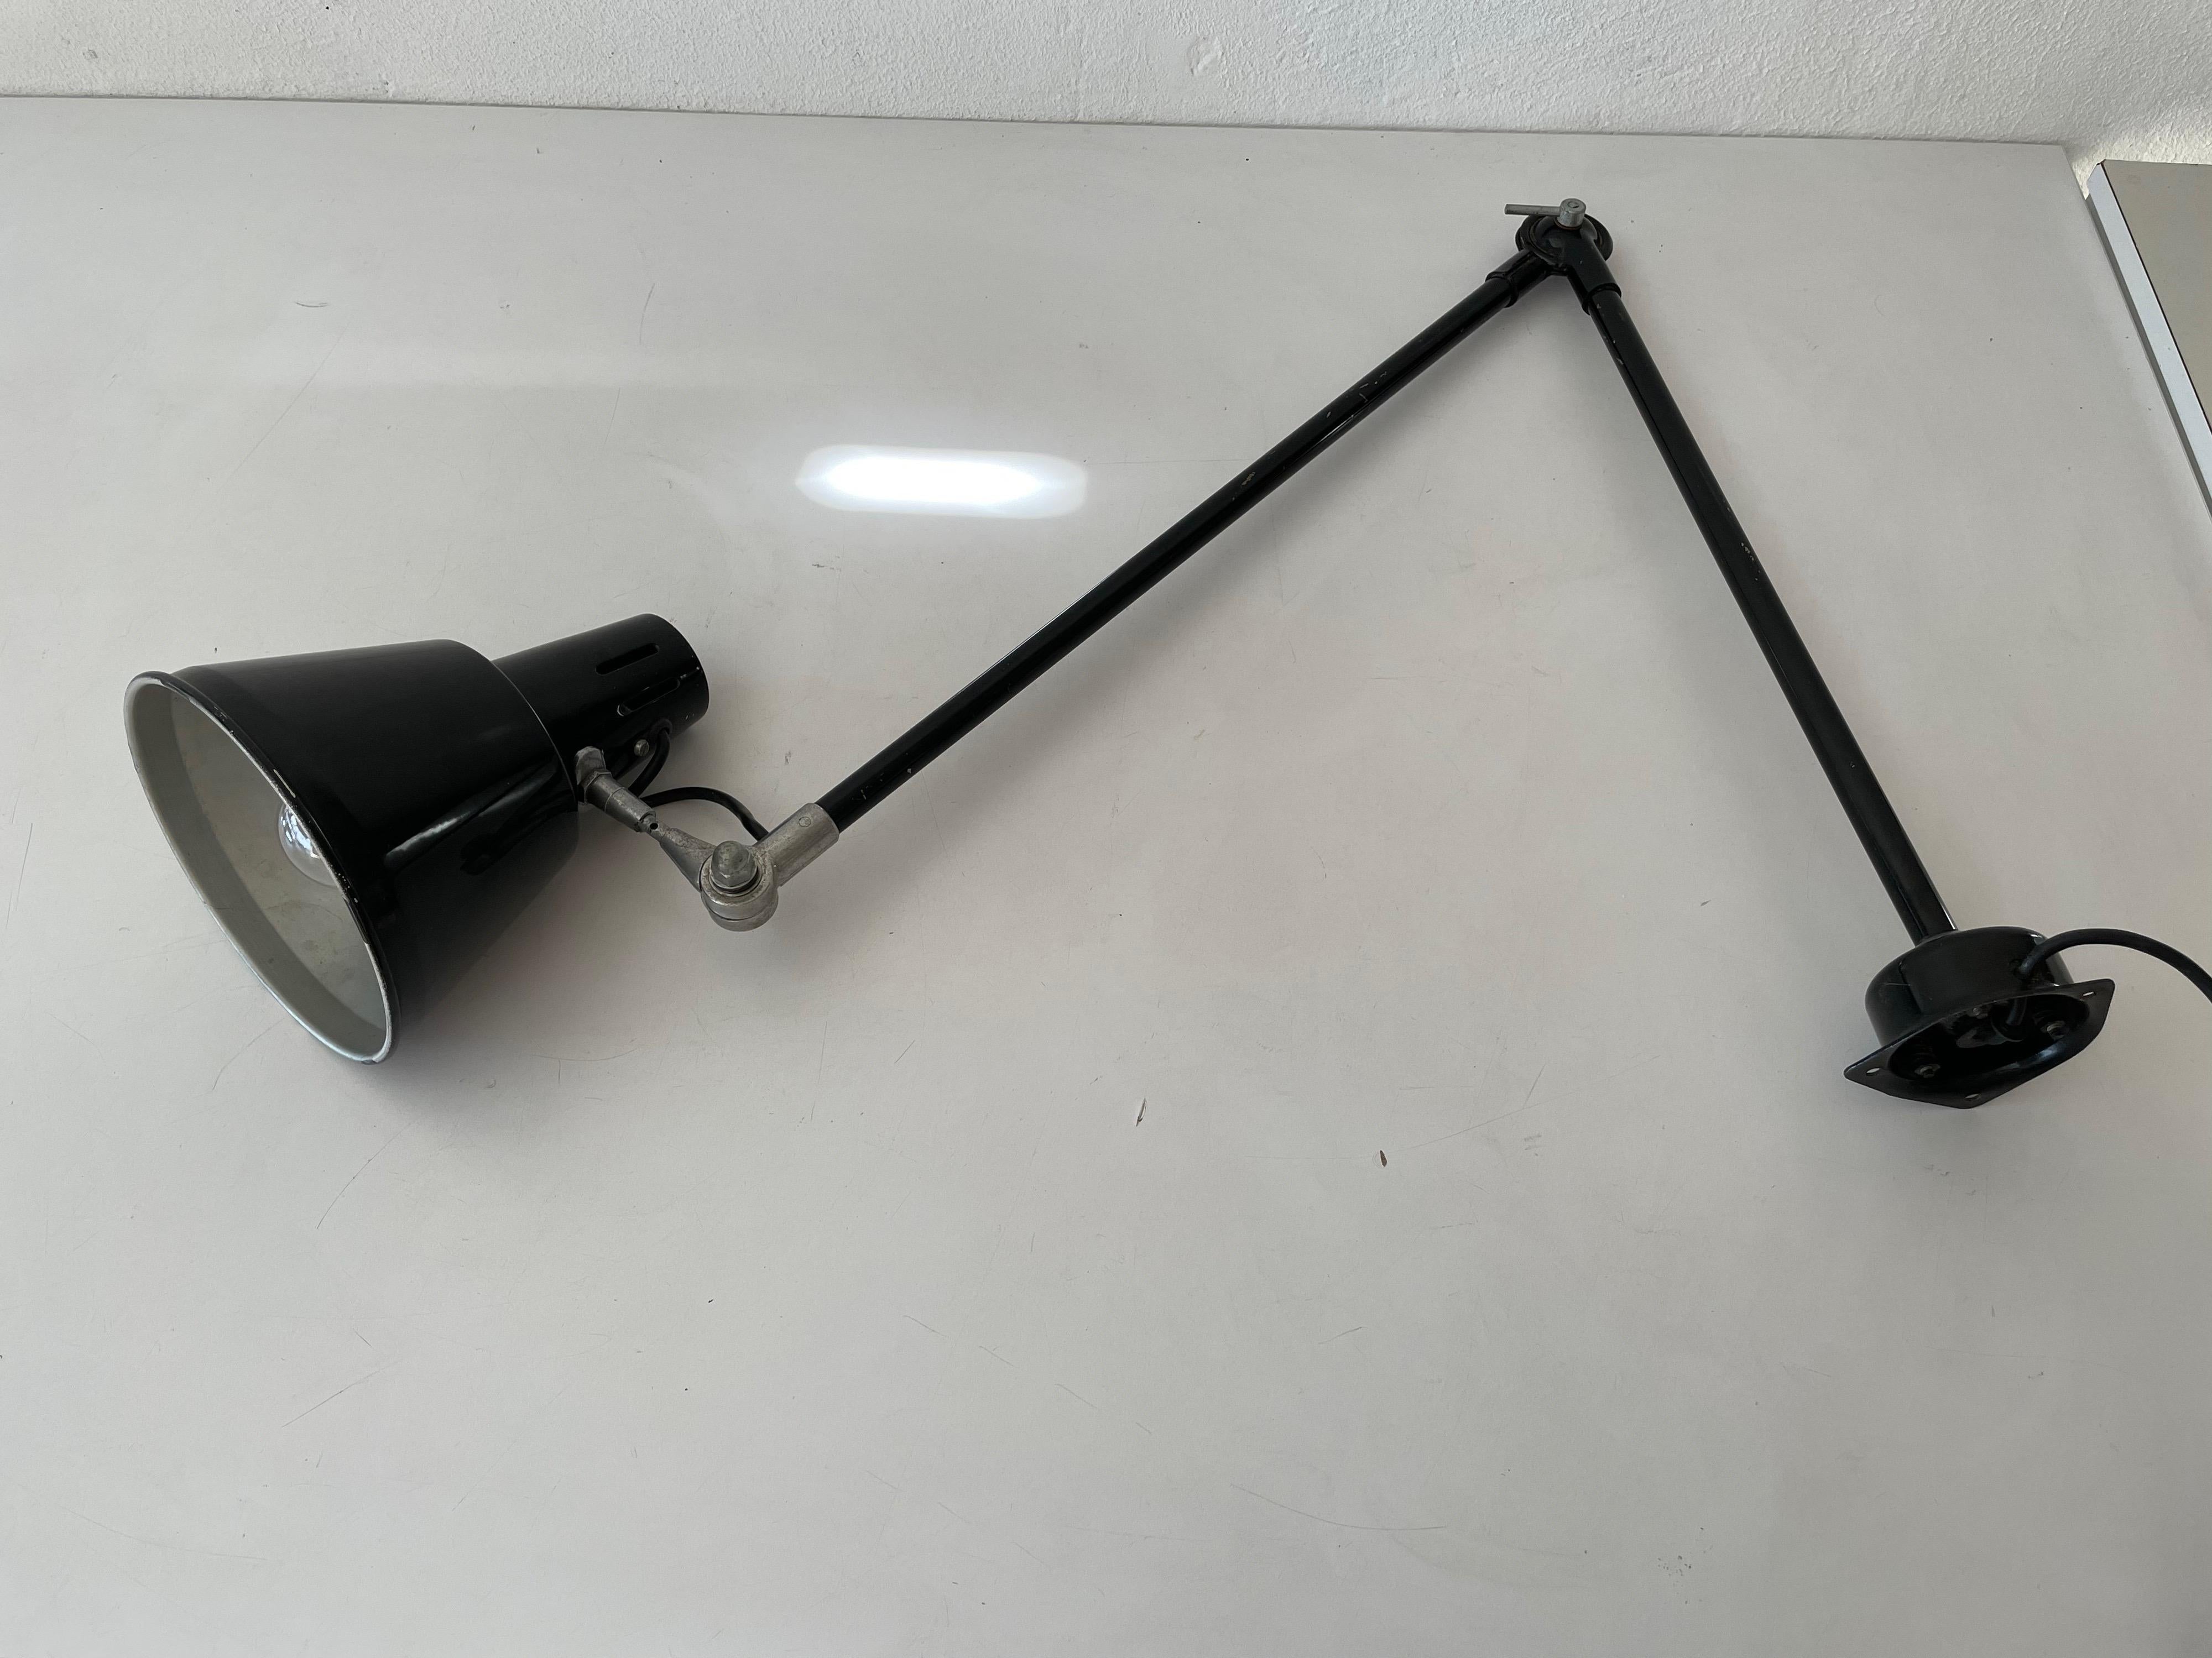 Art Deco Industrial Black Metal Office Wall Lamp by Seminara Torino, 1930s, Italy For Sale